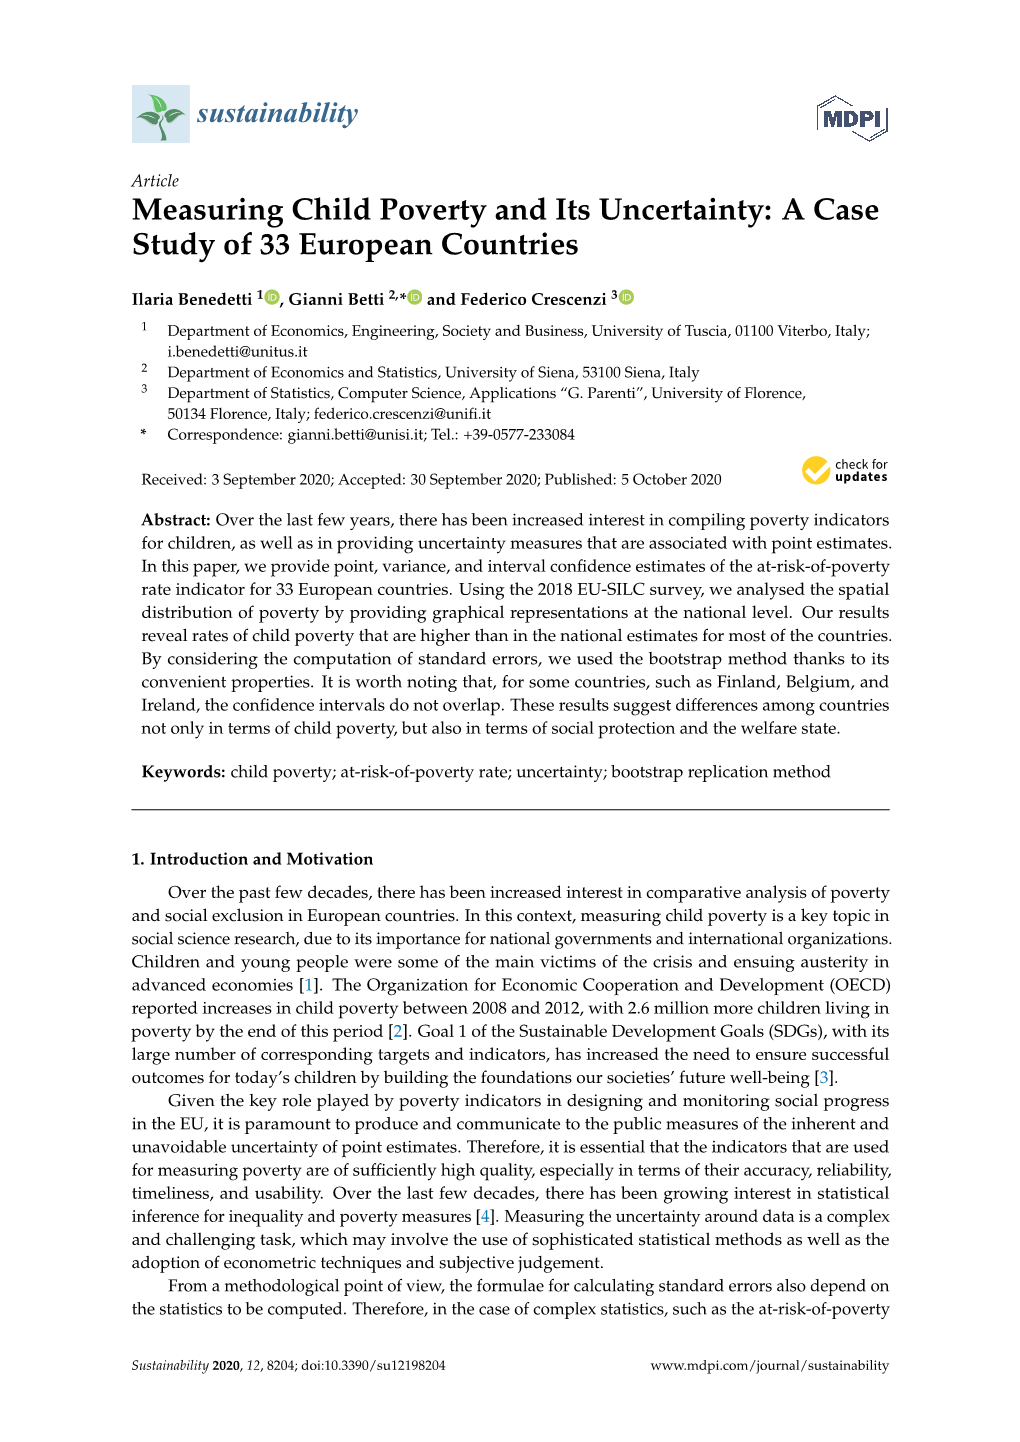 Measuring Child Poverty and Its Uncertainty: a Case Study of 33 European Countries